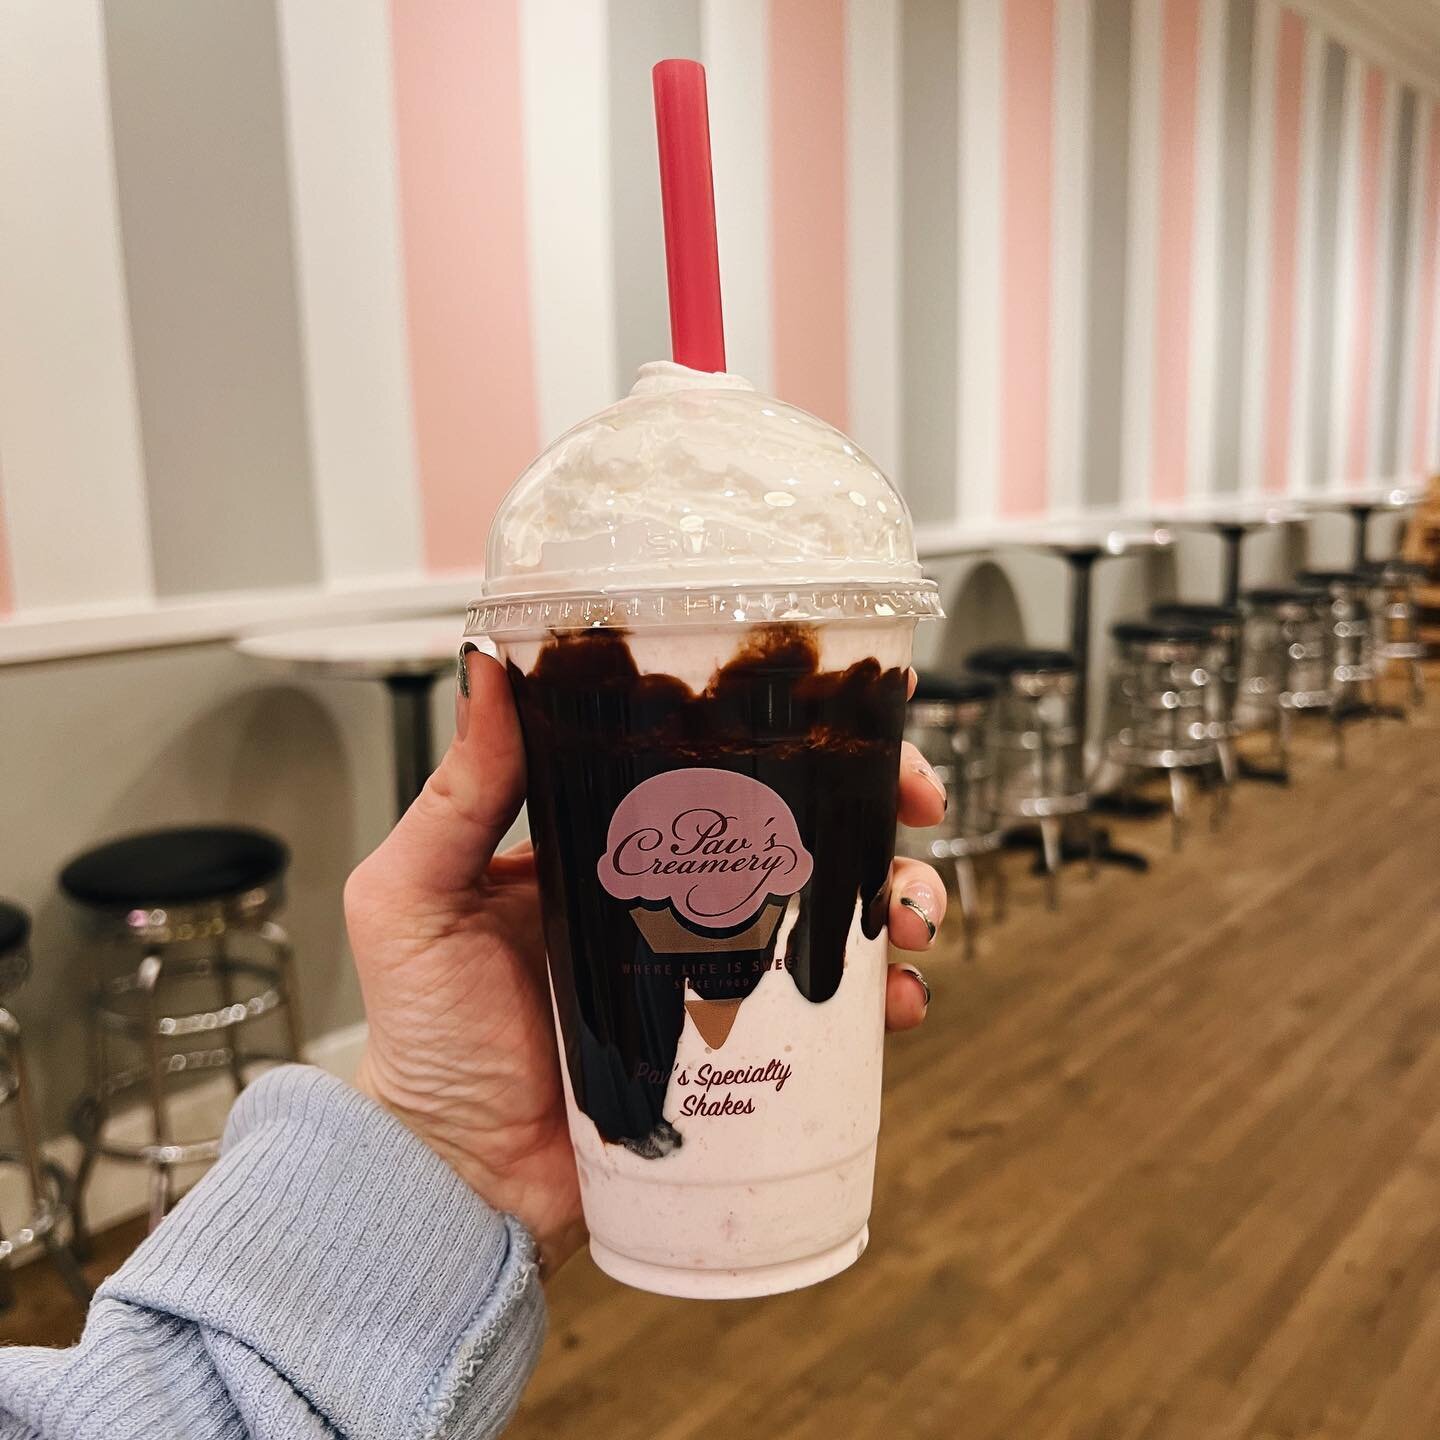 This chocolate covered strawberry shake from @pavscreamery is to die for 😍🍫